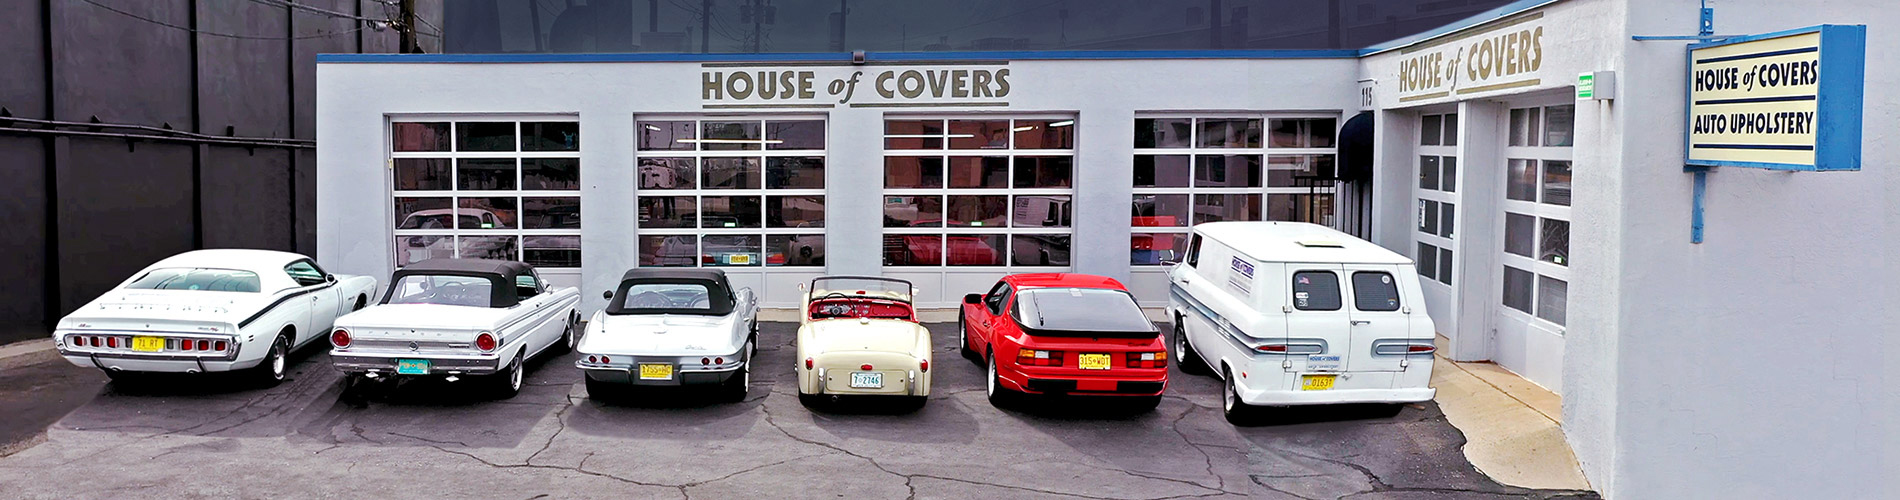 Welcome to House of Covers